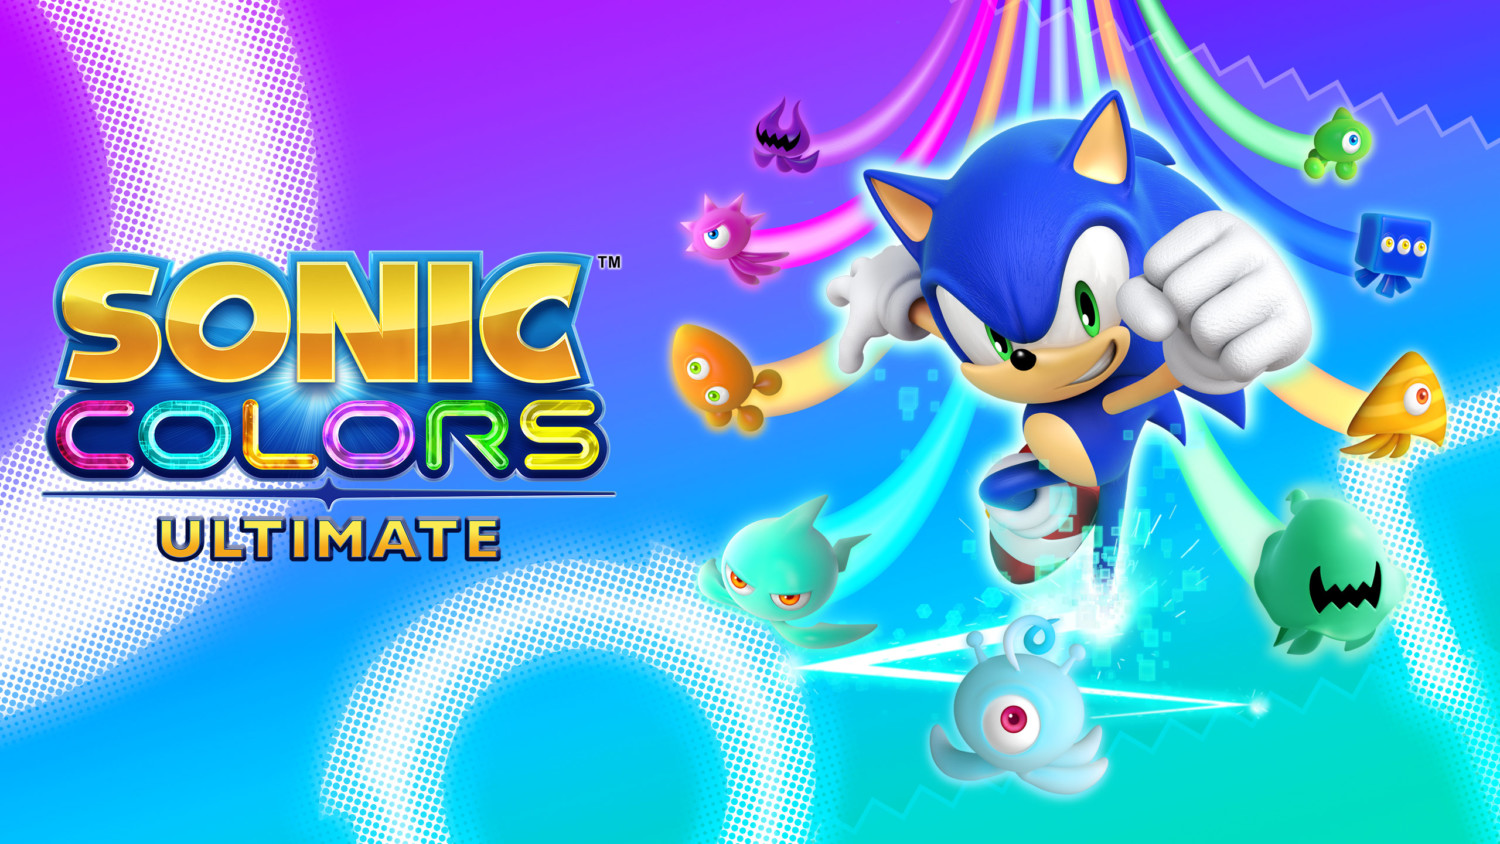 Rumour: Sonic Colours remaster mentioned by a German voice